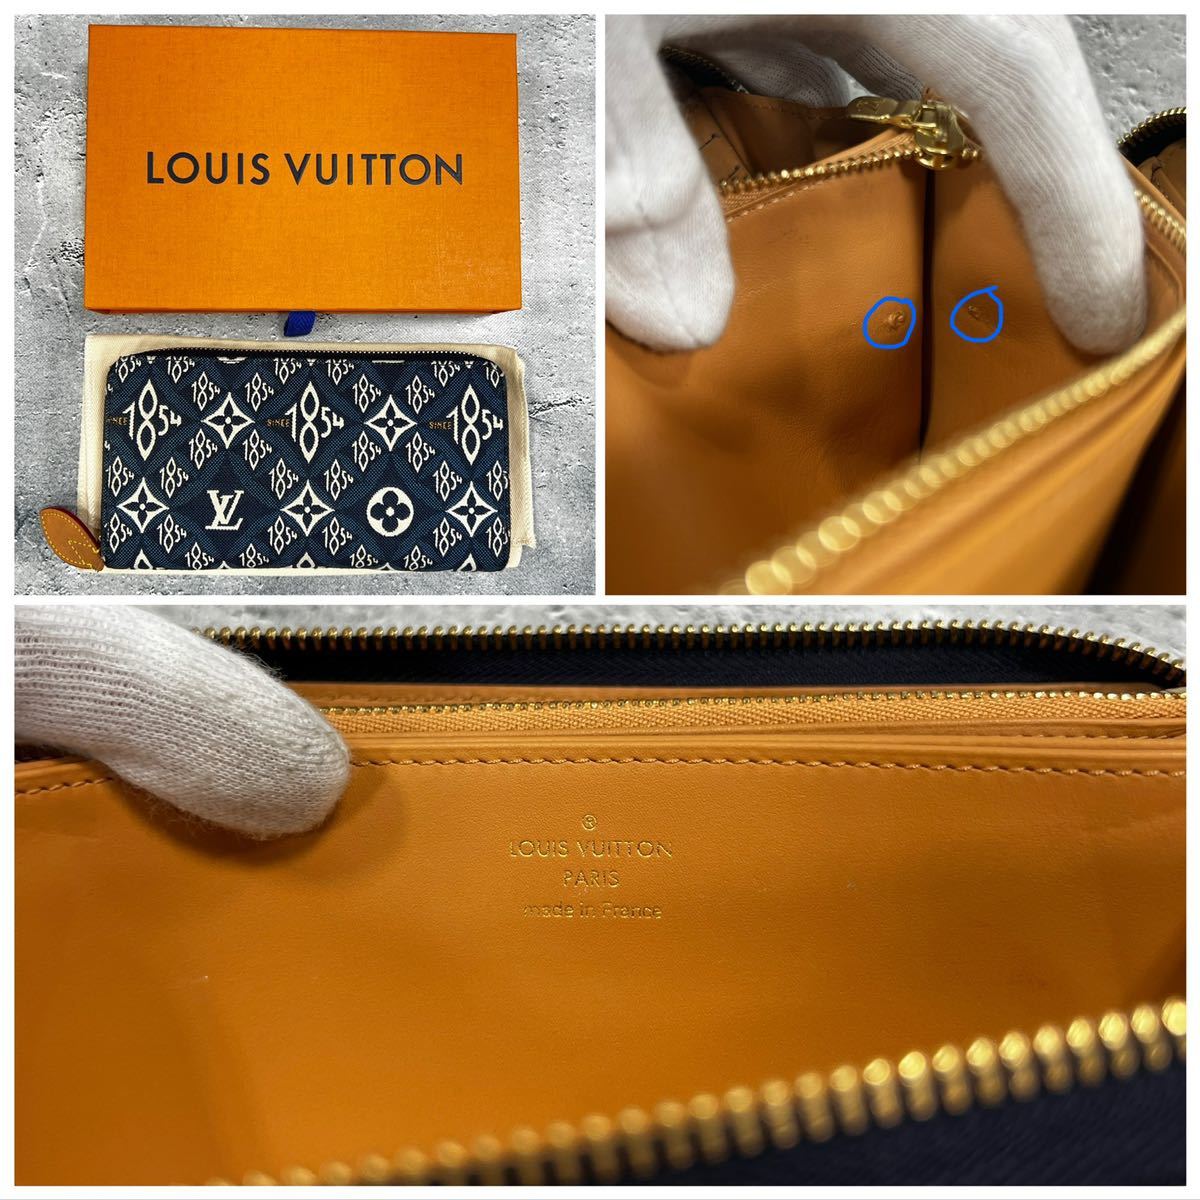 LOUIS VUITTON ルイヴィトン SINCE 1854 ジッピーウォレット